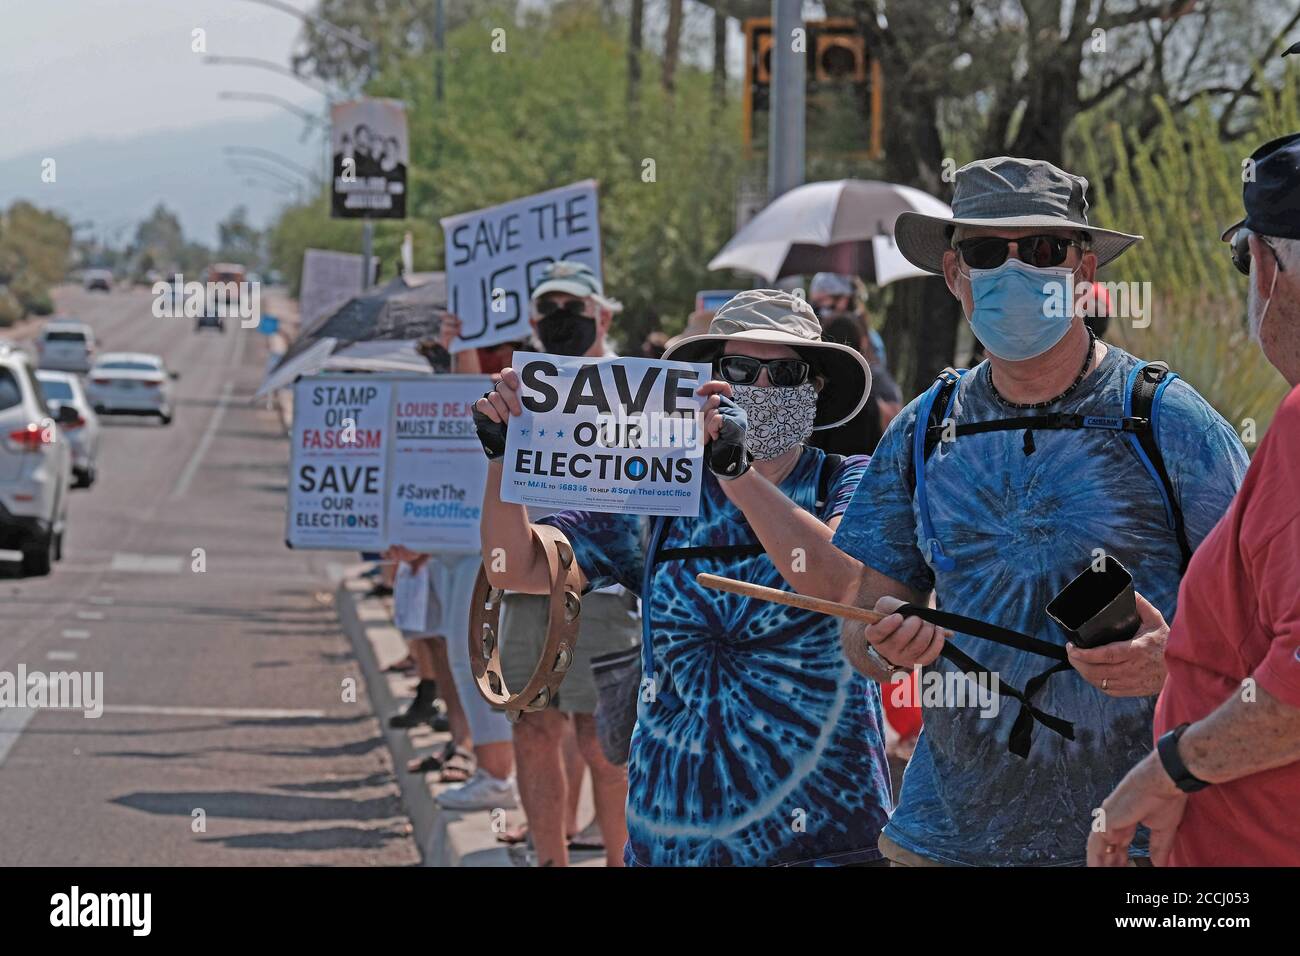 Tucson, Arizona, USA. 22nd Aug, 2020. Demonstrators outside of a Tucson  Post Office protesting the Trump administrations attack on the postal  service. They came to show support for the institution of the